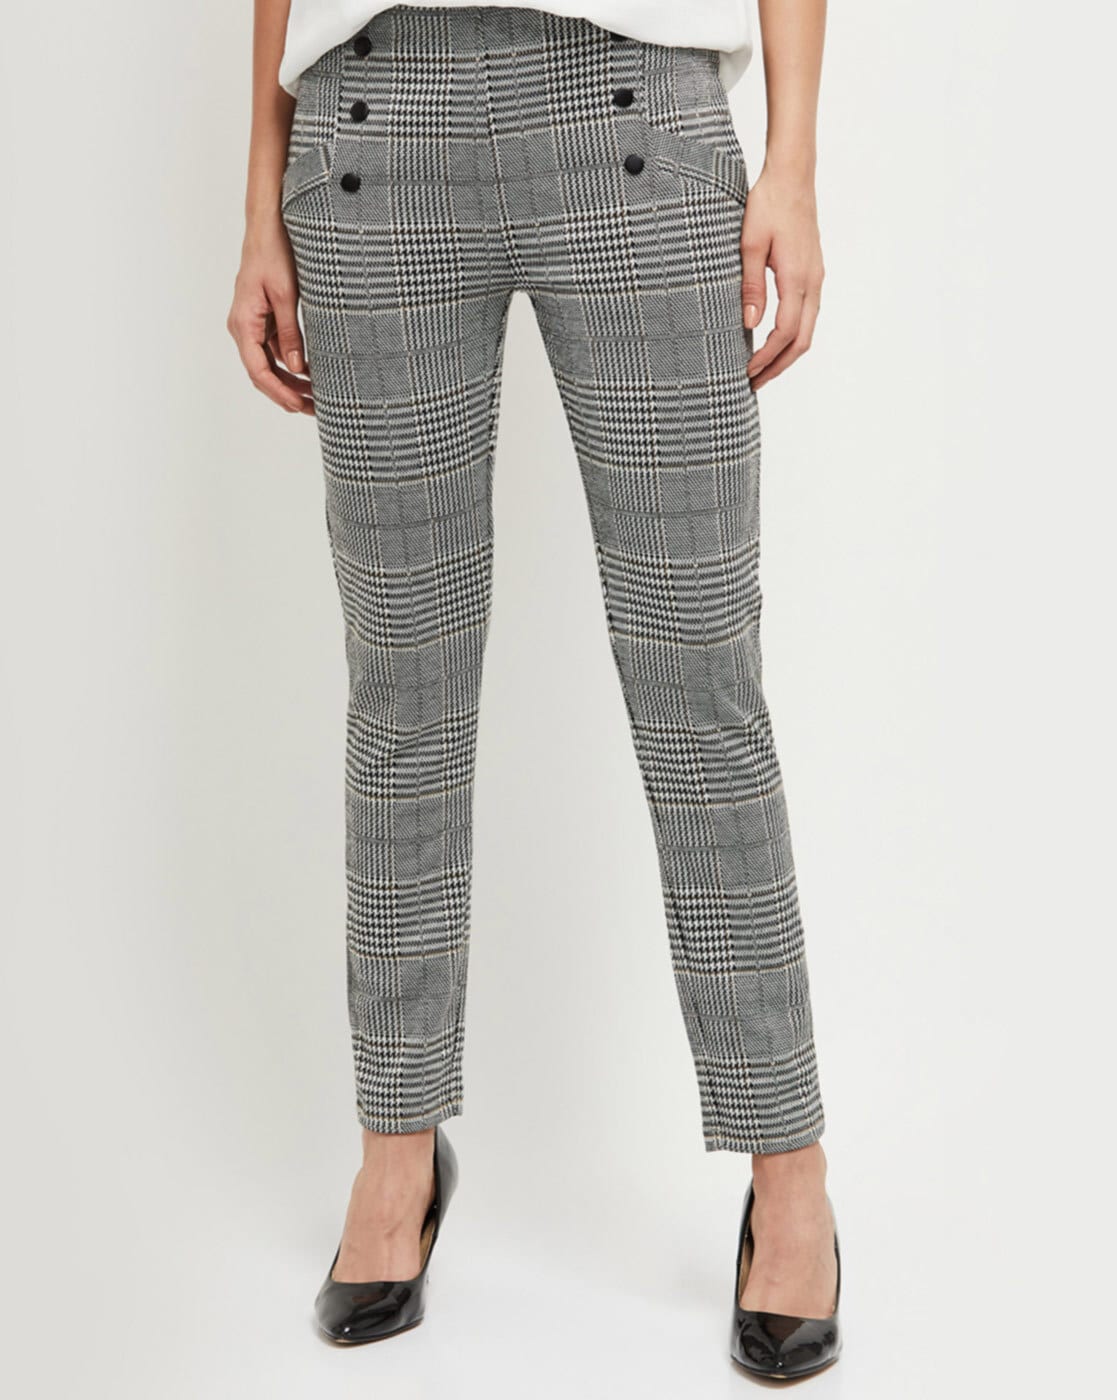 Light Before Dark Tie Front Grey Checked Trousers  Trousers women outfit Checked  trousers outfit Clothes